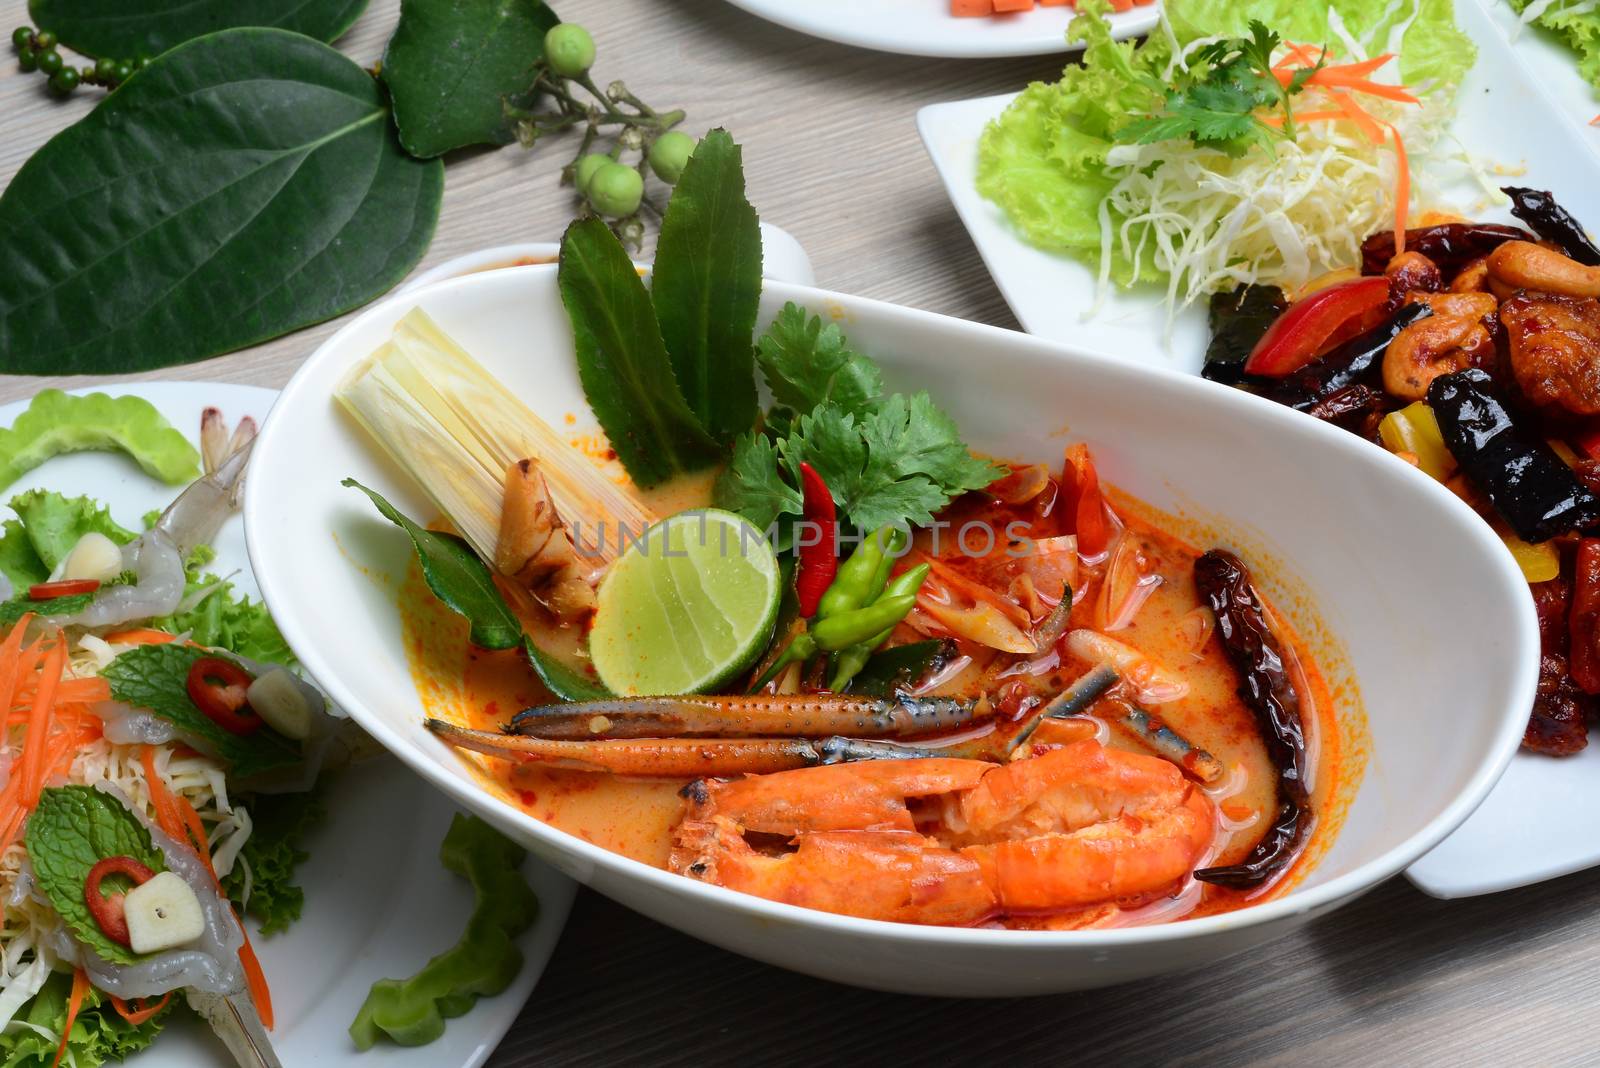 River prawn spicy soup,(in Thai: Tom Yum goong or Tom Yum kung) is probably the most famous of Thai soups and is popular not only in Thailand but in Thai restaurants worldwide.